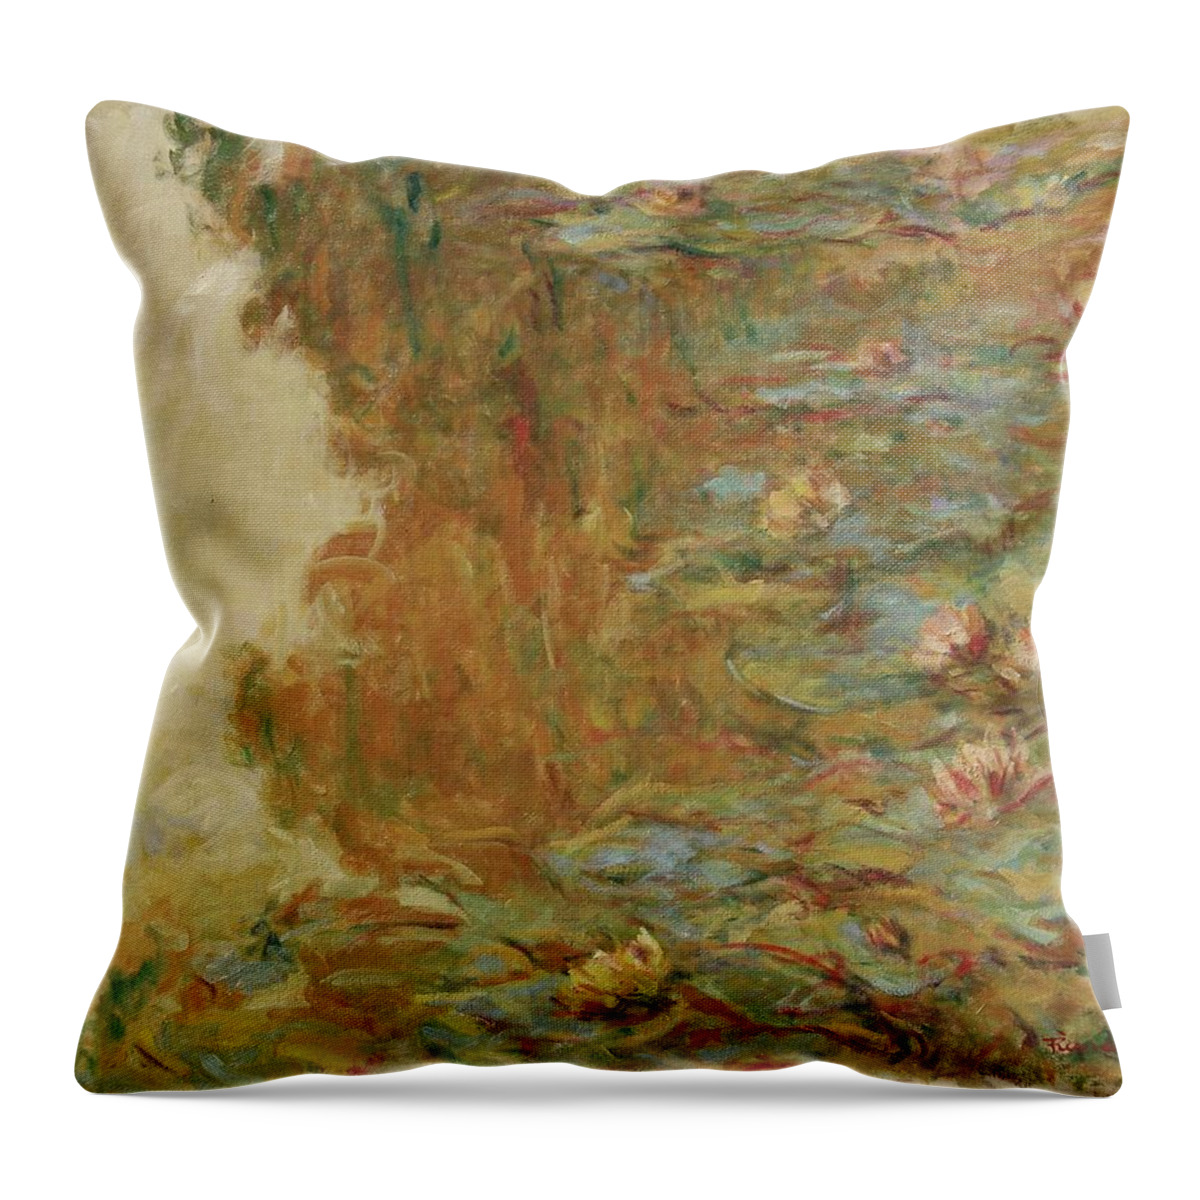 Nymphaea Throw Pillow featuring the painting Waterlelie Nymphaea Nr.18 by Pierre Dijk